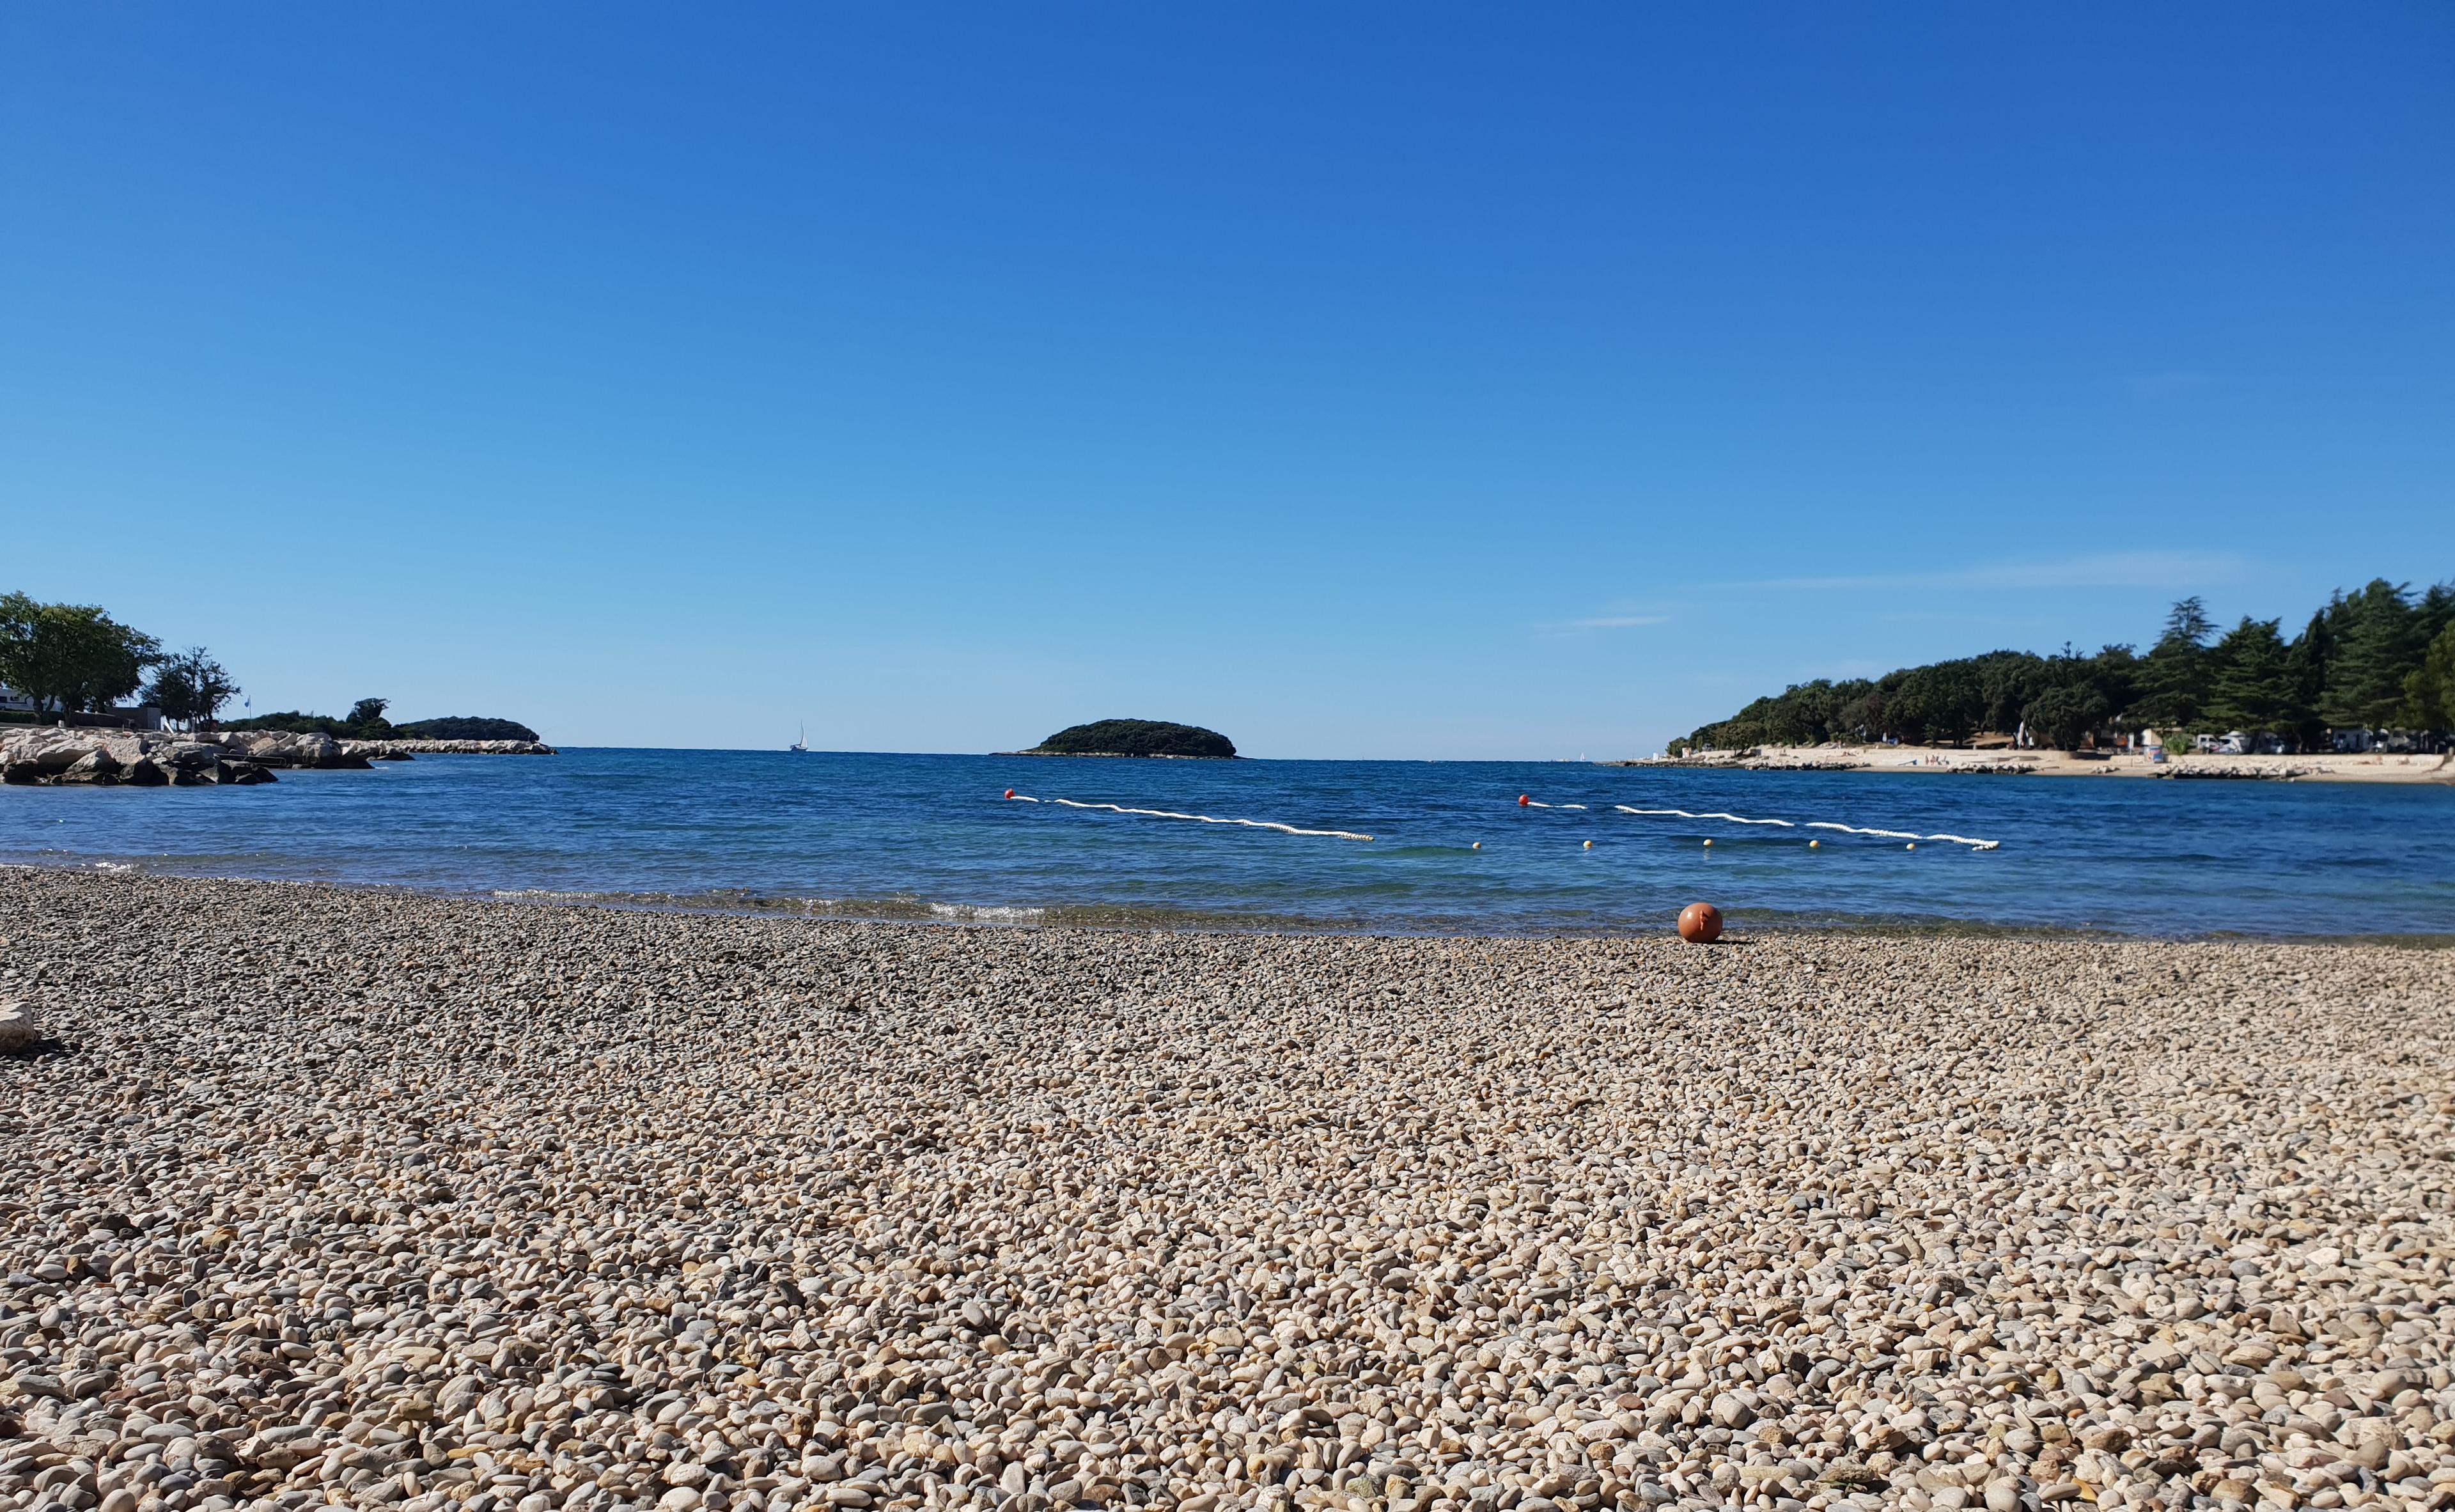 Renting a motorhome and going to Croatia - how much does it cost? – image 1